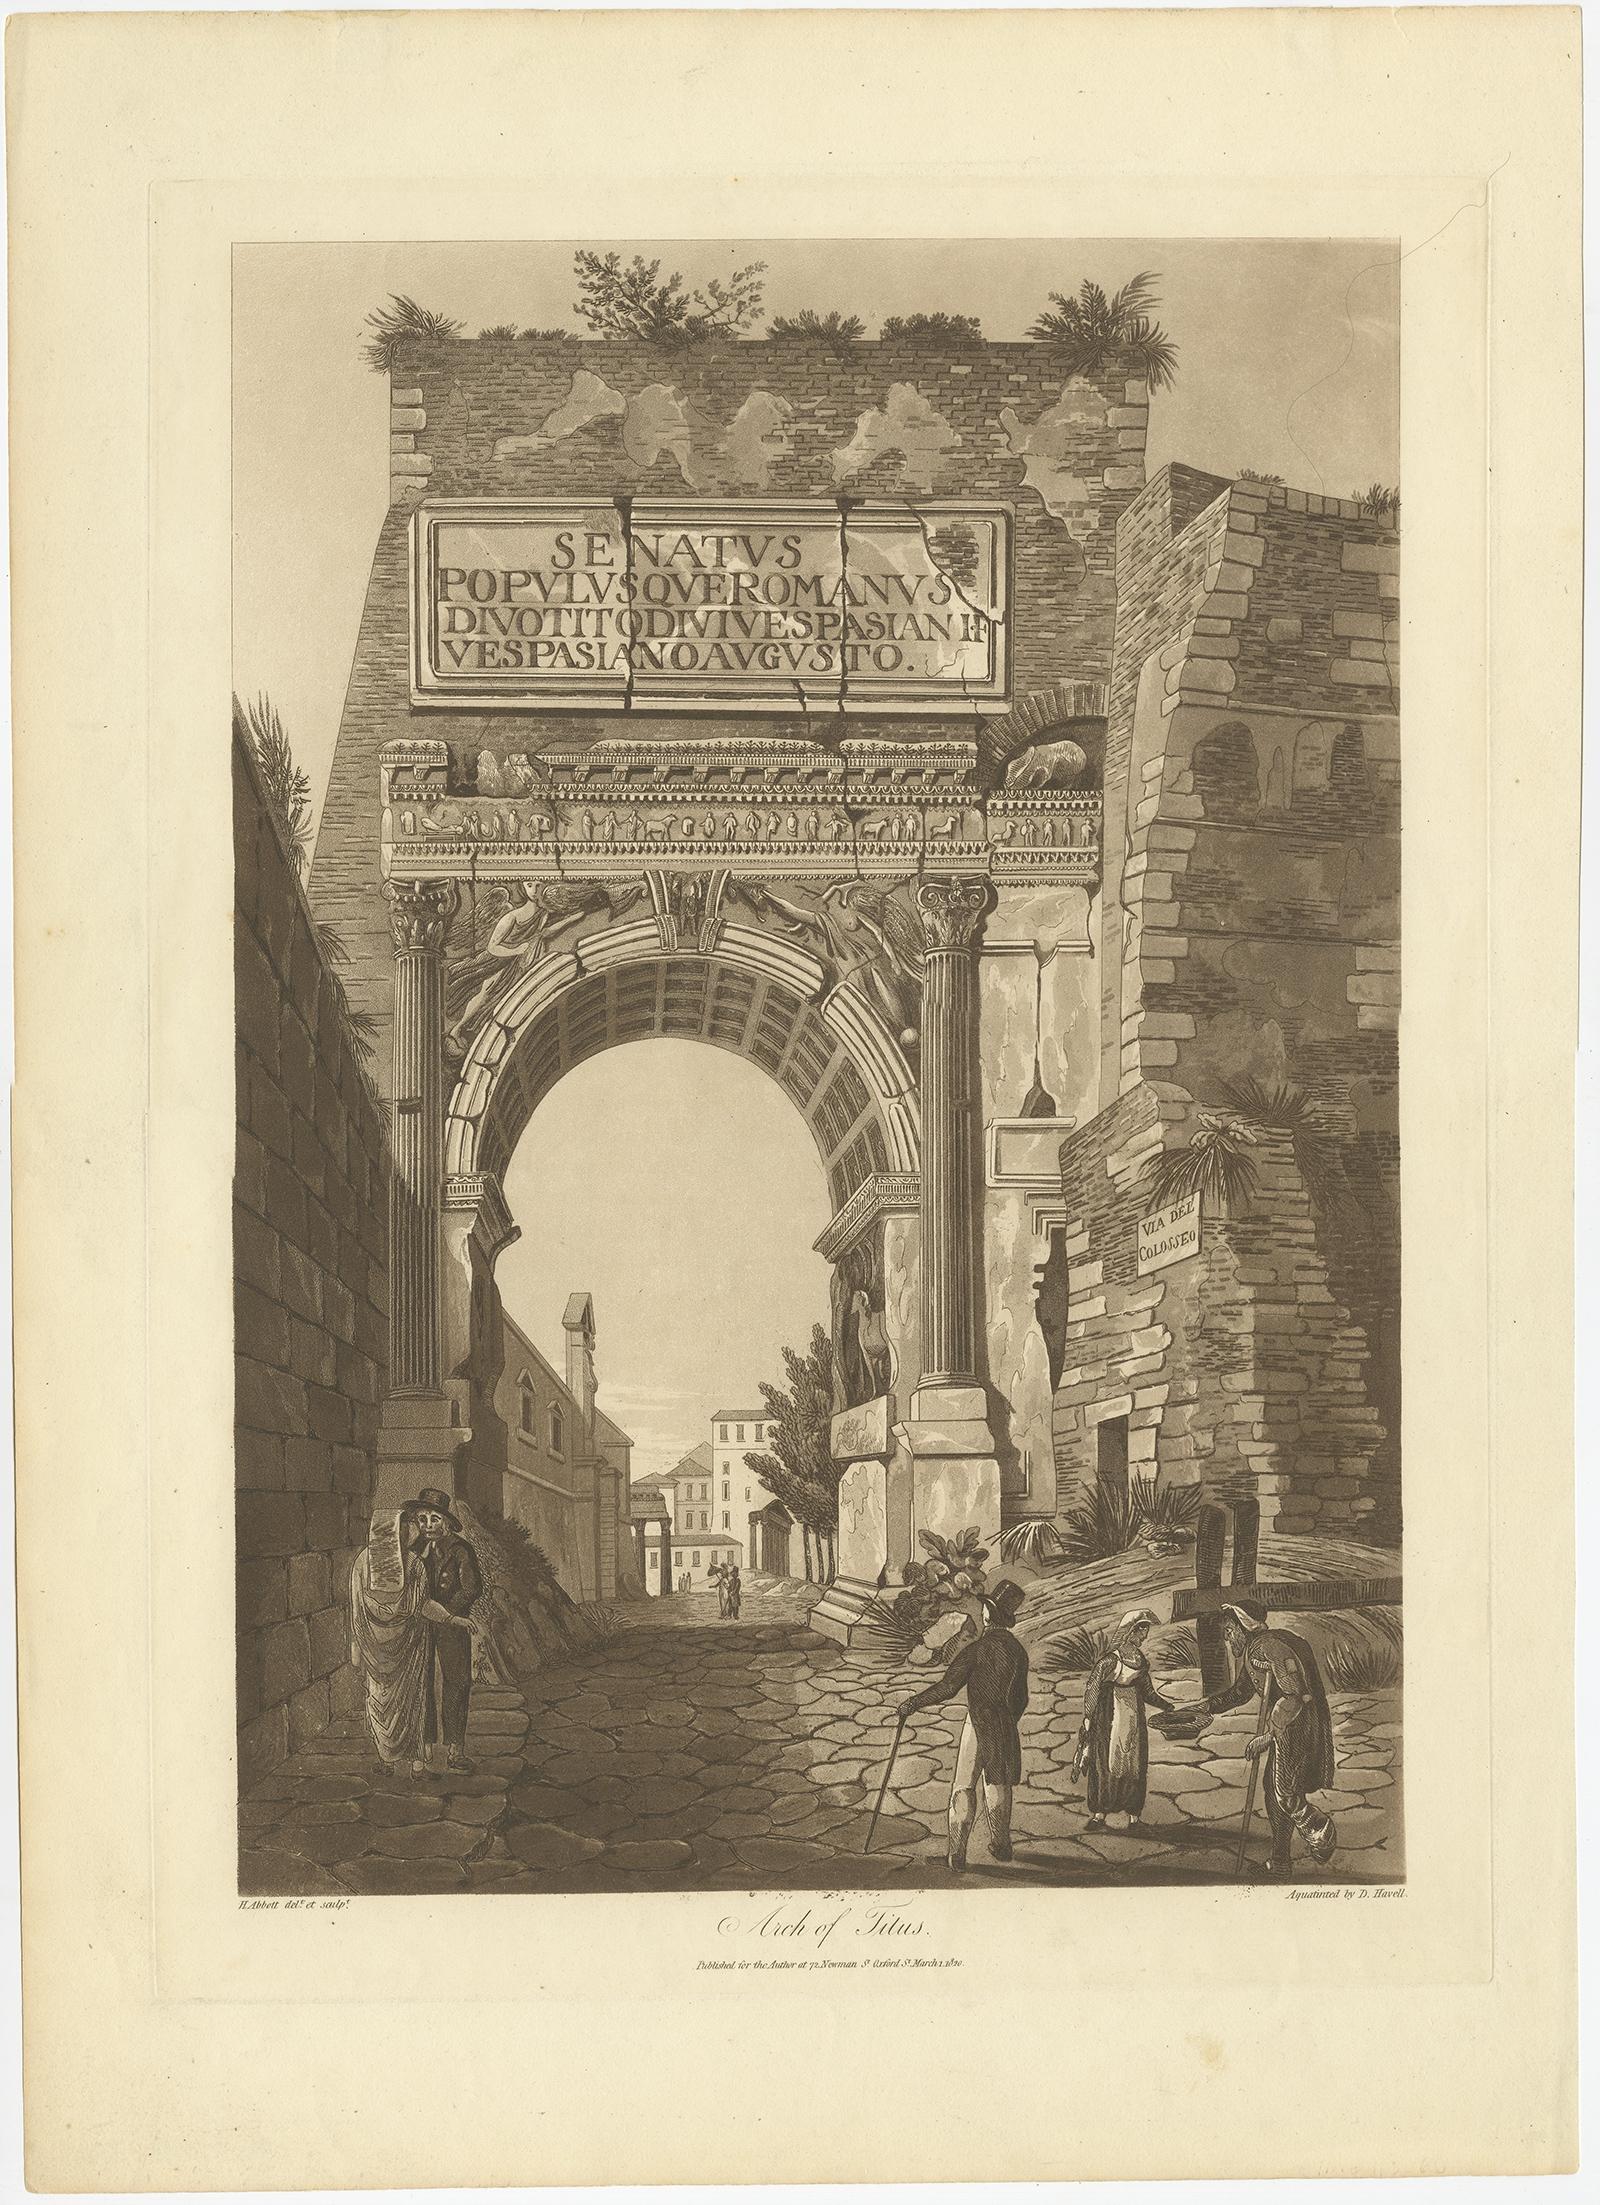 Antique print titled 'Arch of Titus'. 

Large aquatint of the Arch of Titus'. The Arch of Titus is a 1st-century AD honorific arch, located on the Via Sacra, Rome, just to the south-east of the Roman Forum. It was constructed in c. 81 AD by the